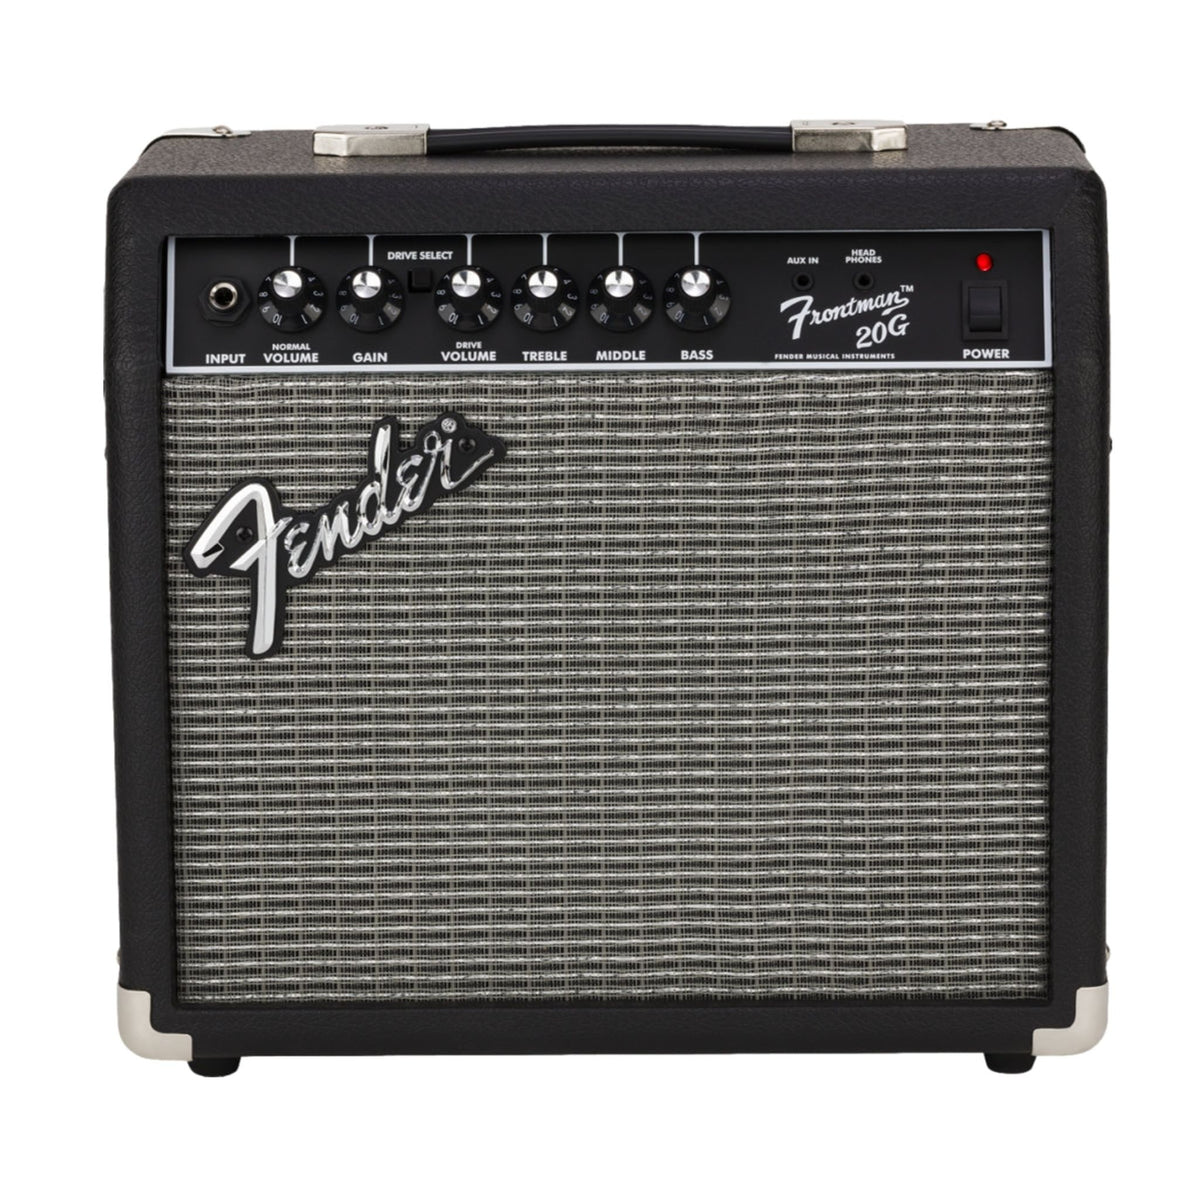 The Fender Frontman 20G brings together familiar Fender cosmetics and “best-in-class” sound quality at a great price point that delivers great tones when practicing or playing with friends.